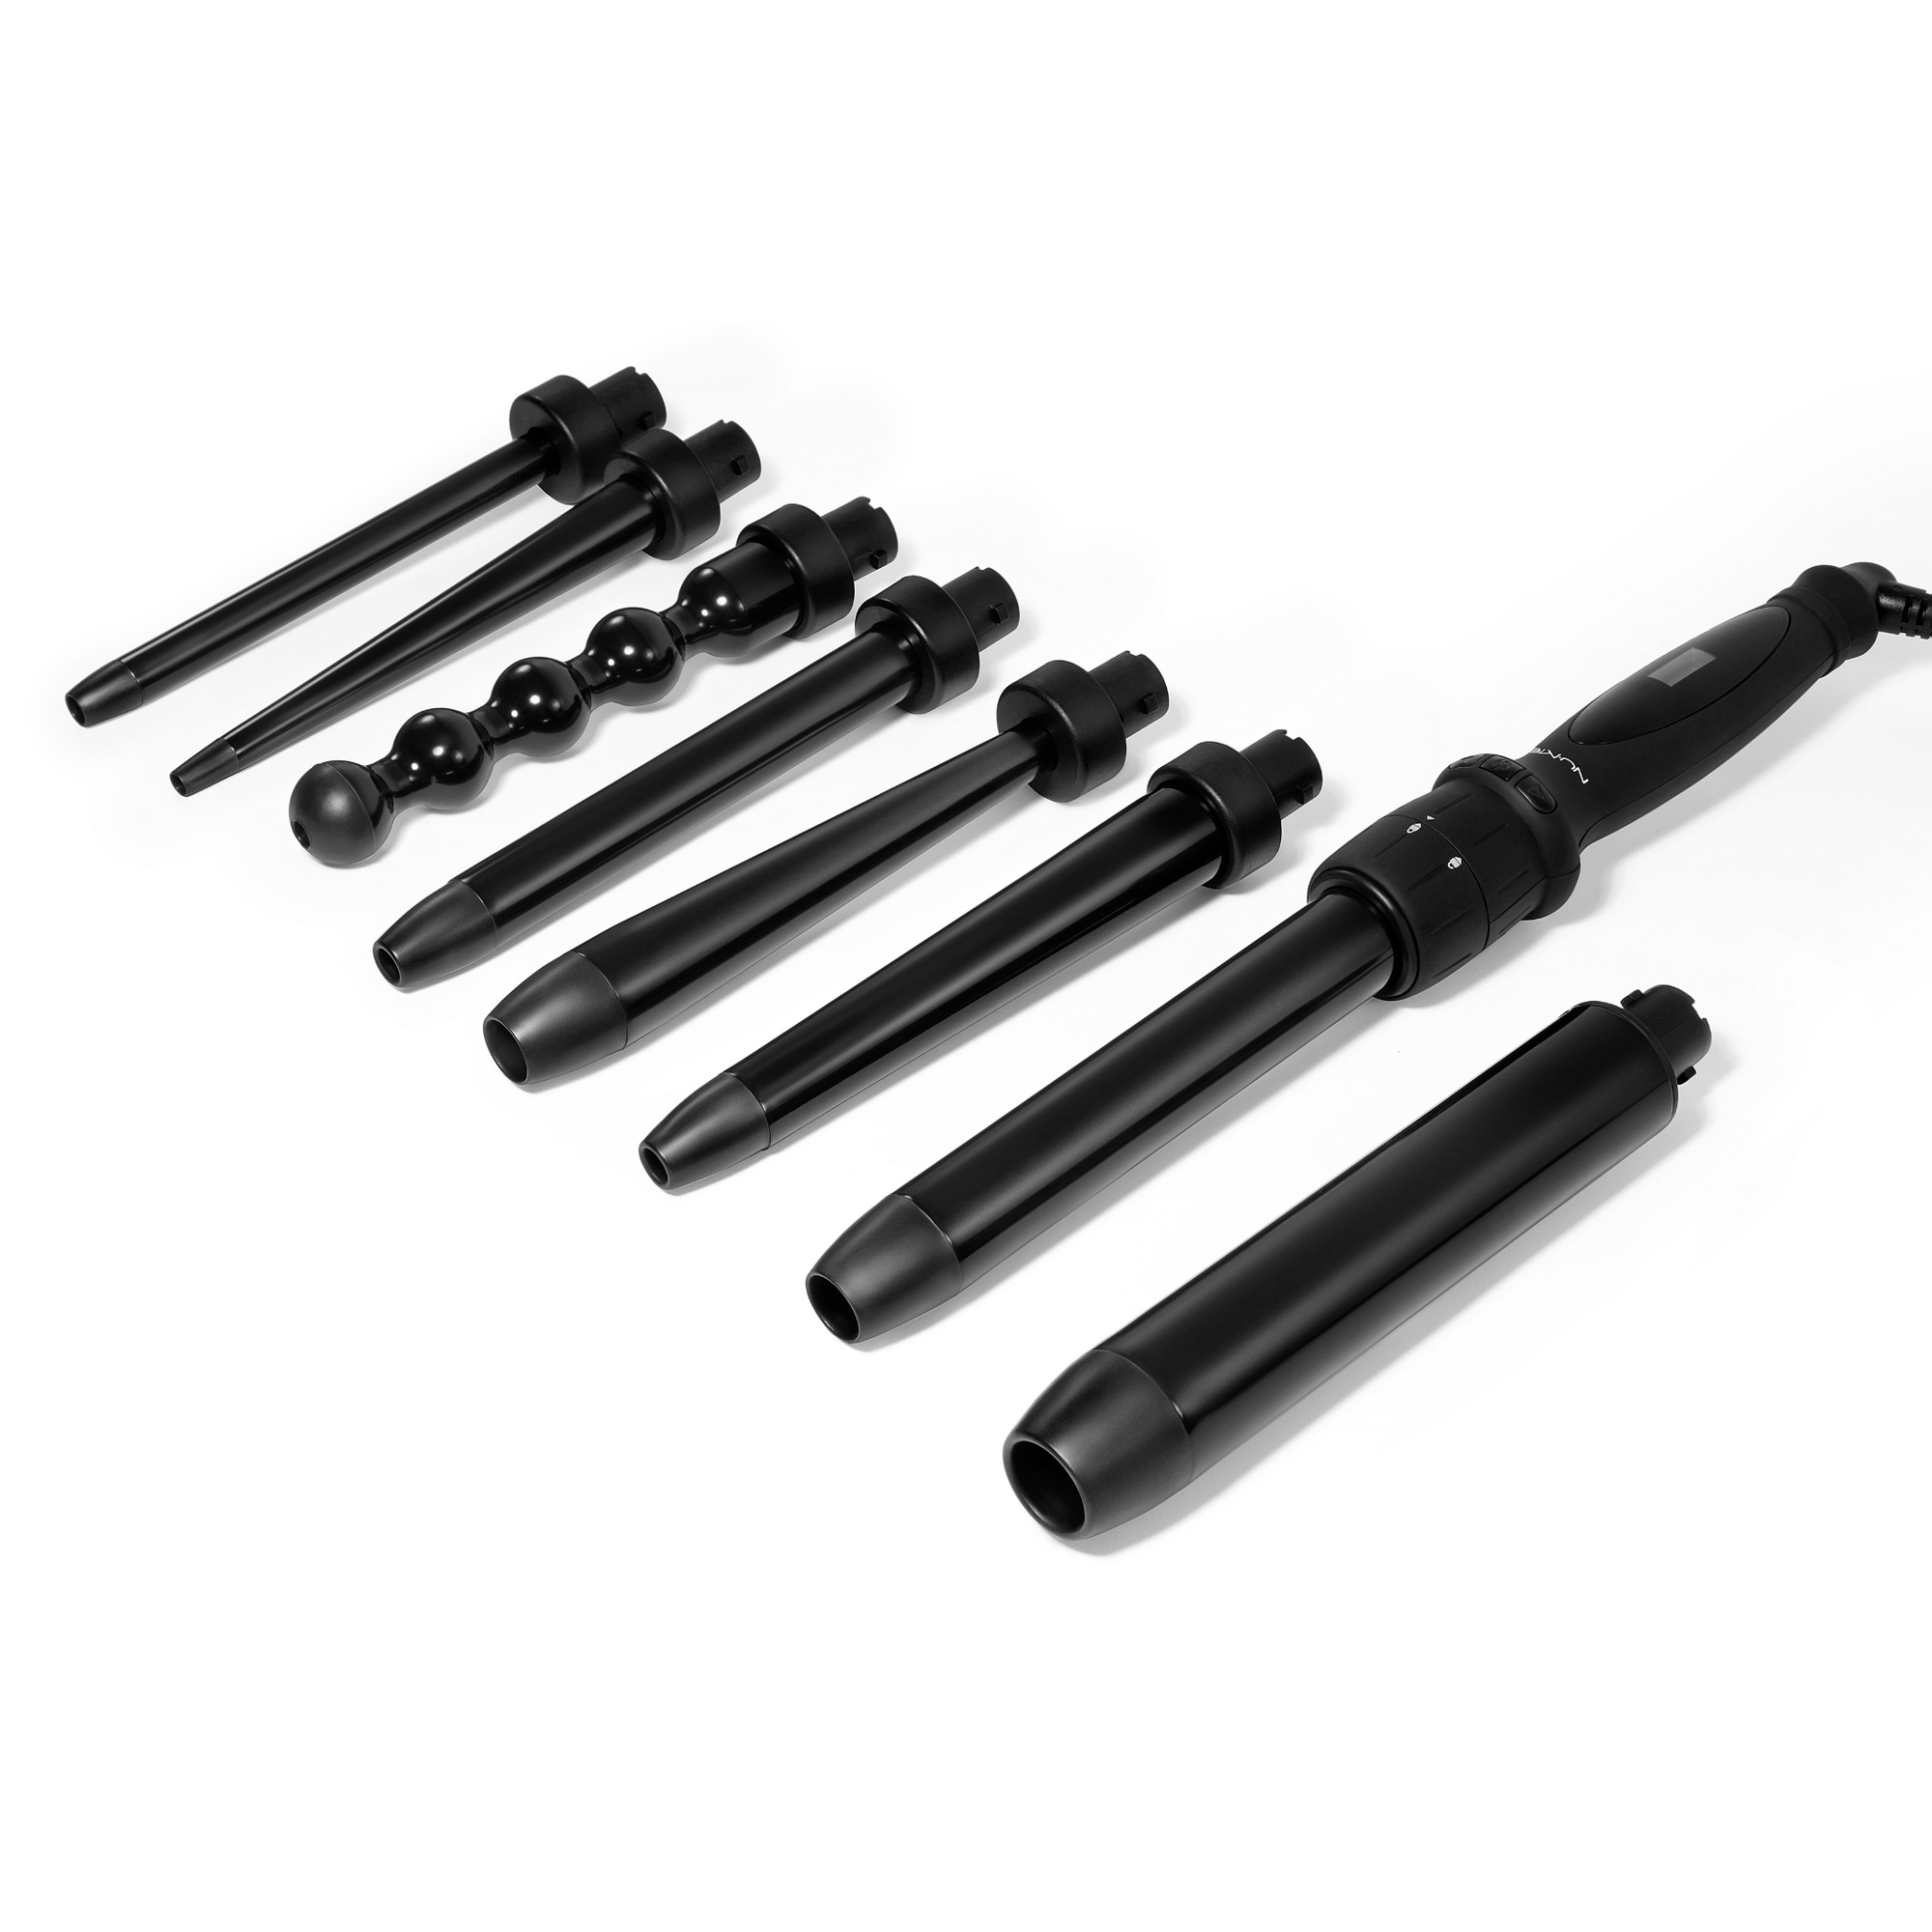 NuMe Octowand 8-in-1 Curling Wand